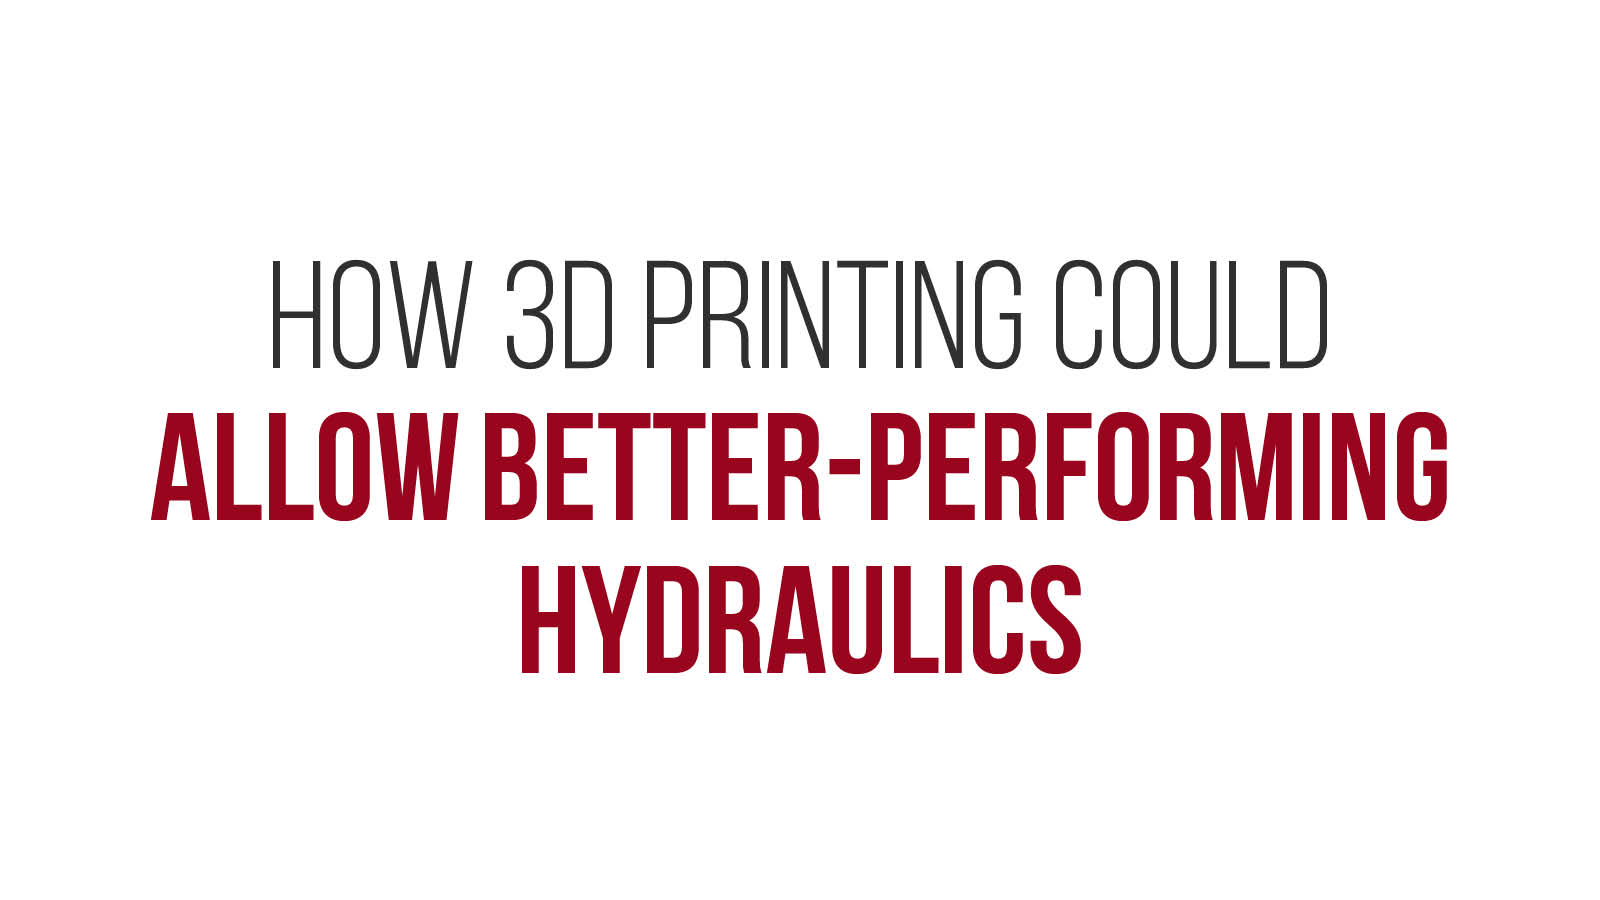 How 3D Printing Could Allow Better-Performing Hydraulics